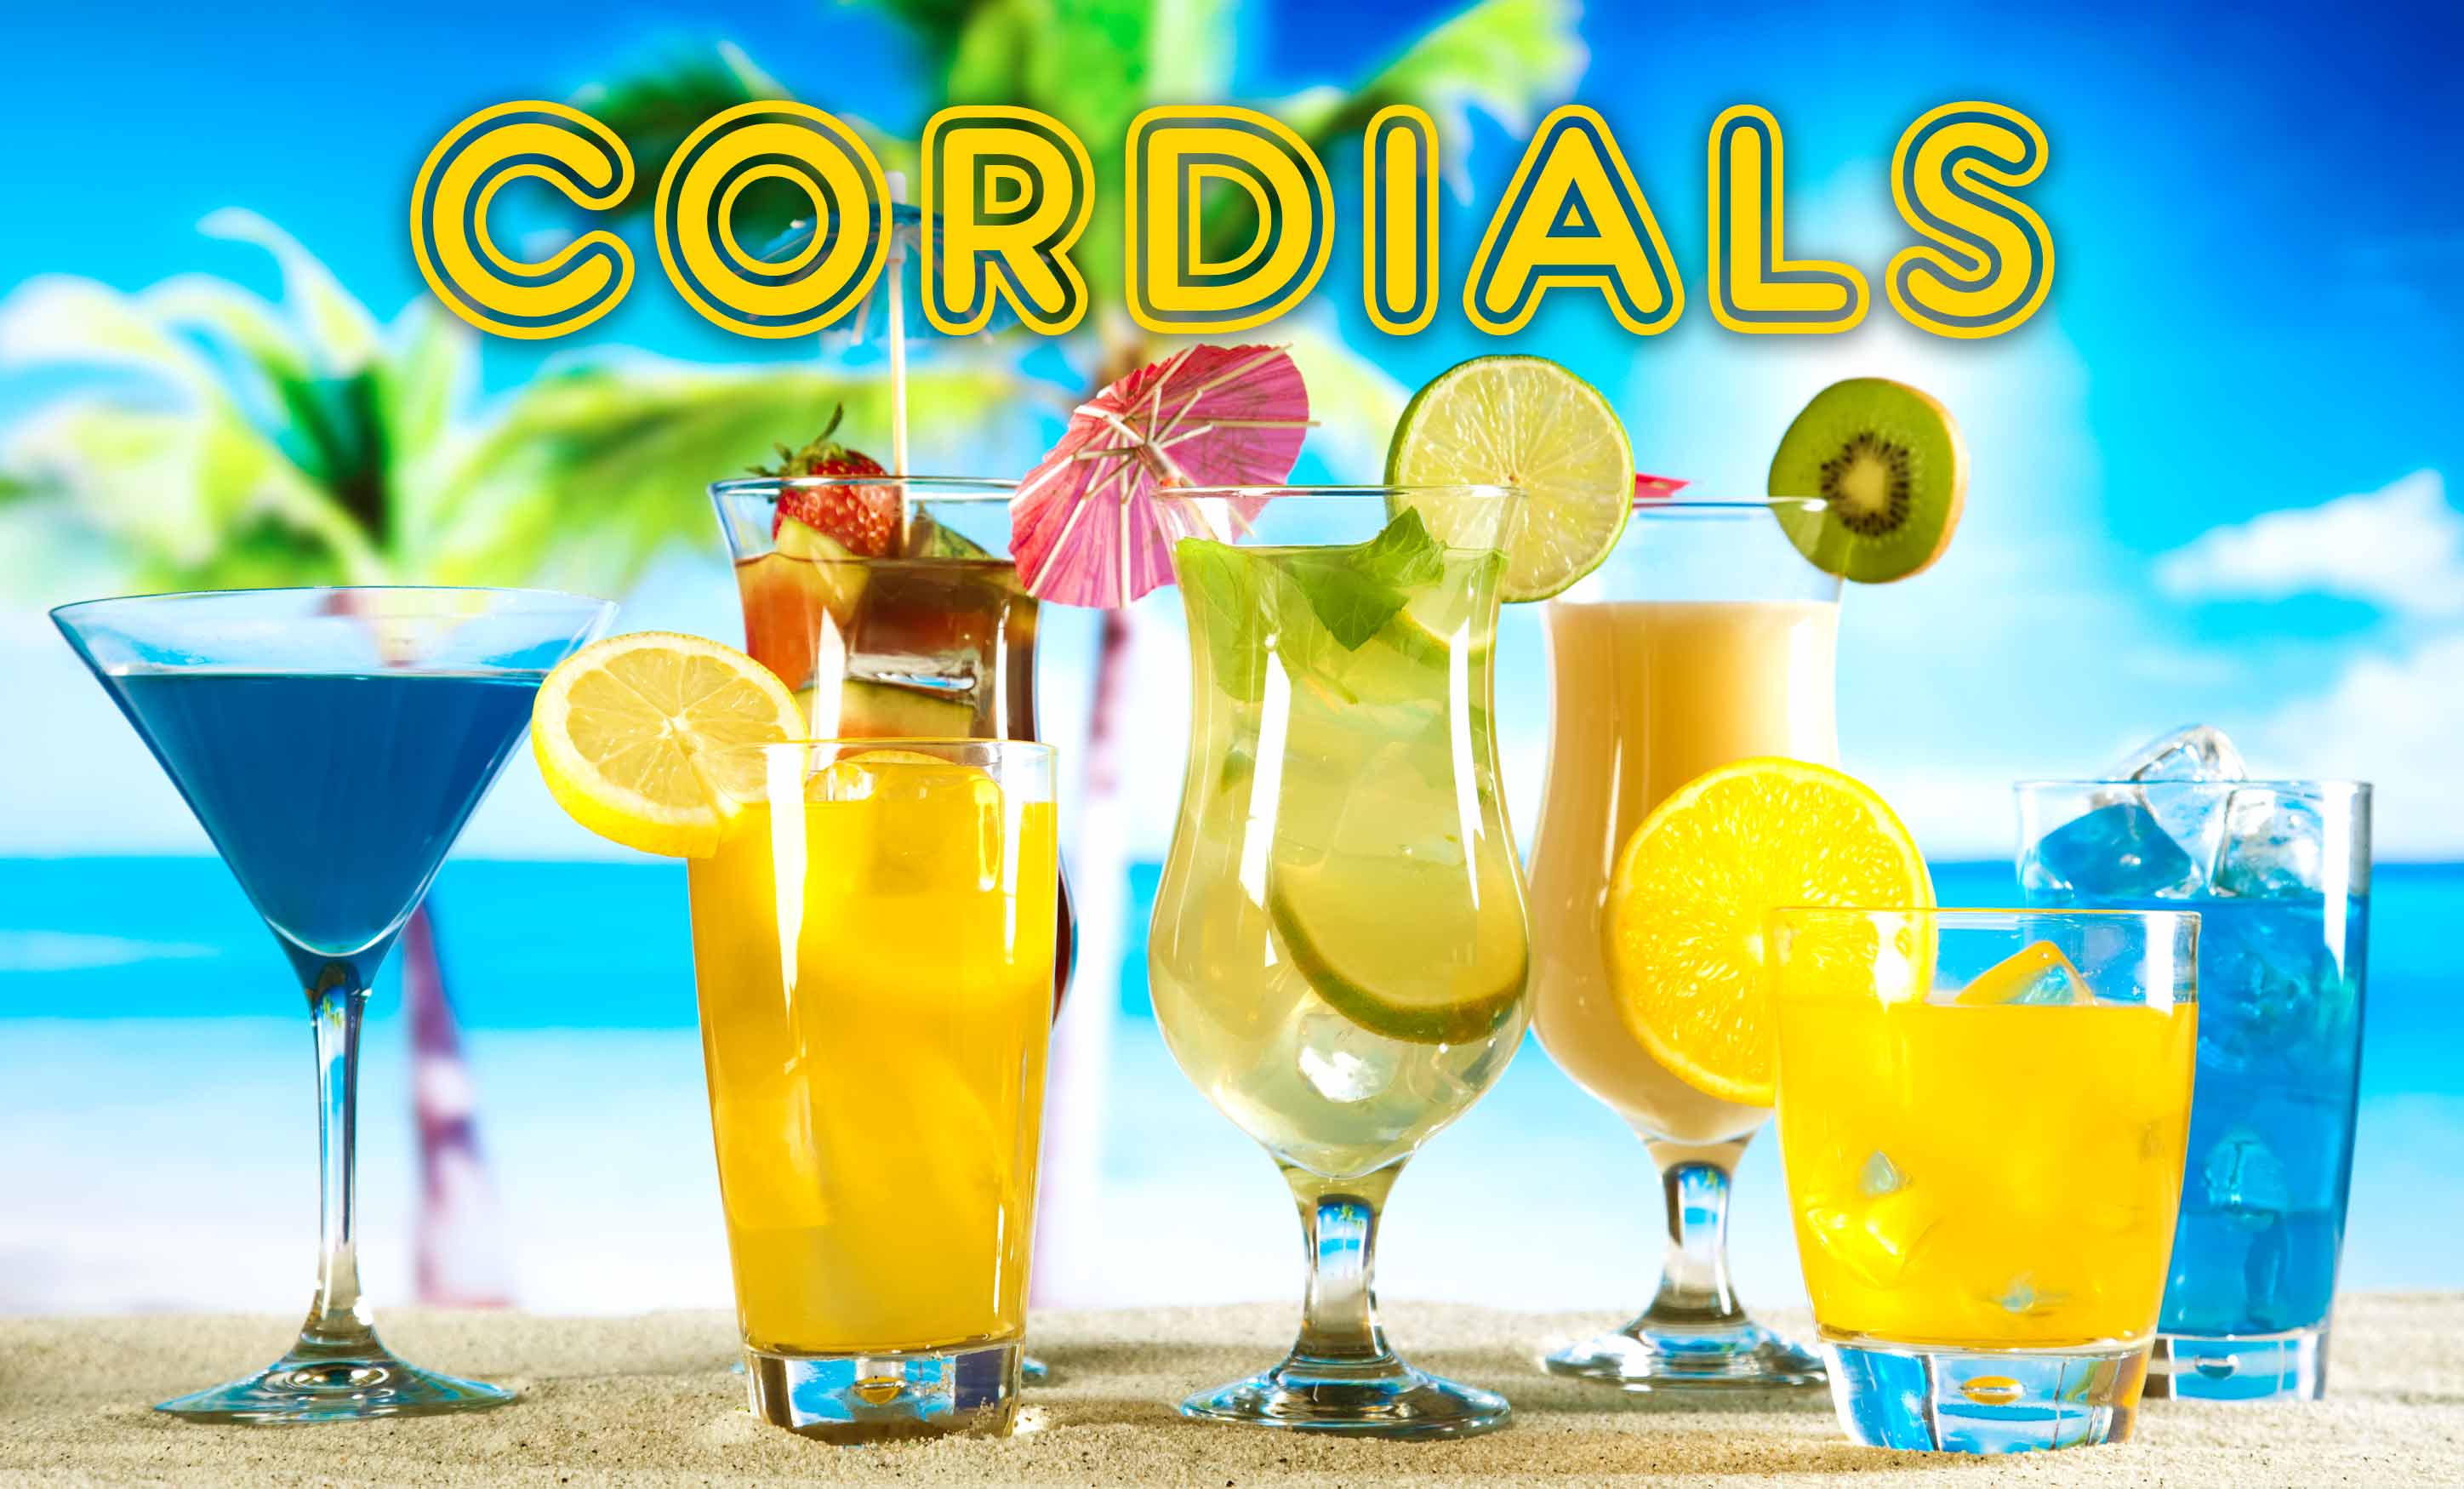 Cordials For Your Pantry This Summer To Make The Best Cocktails!